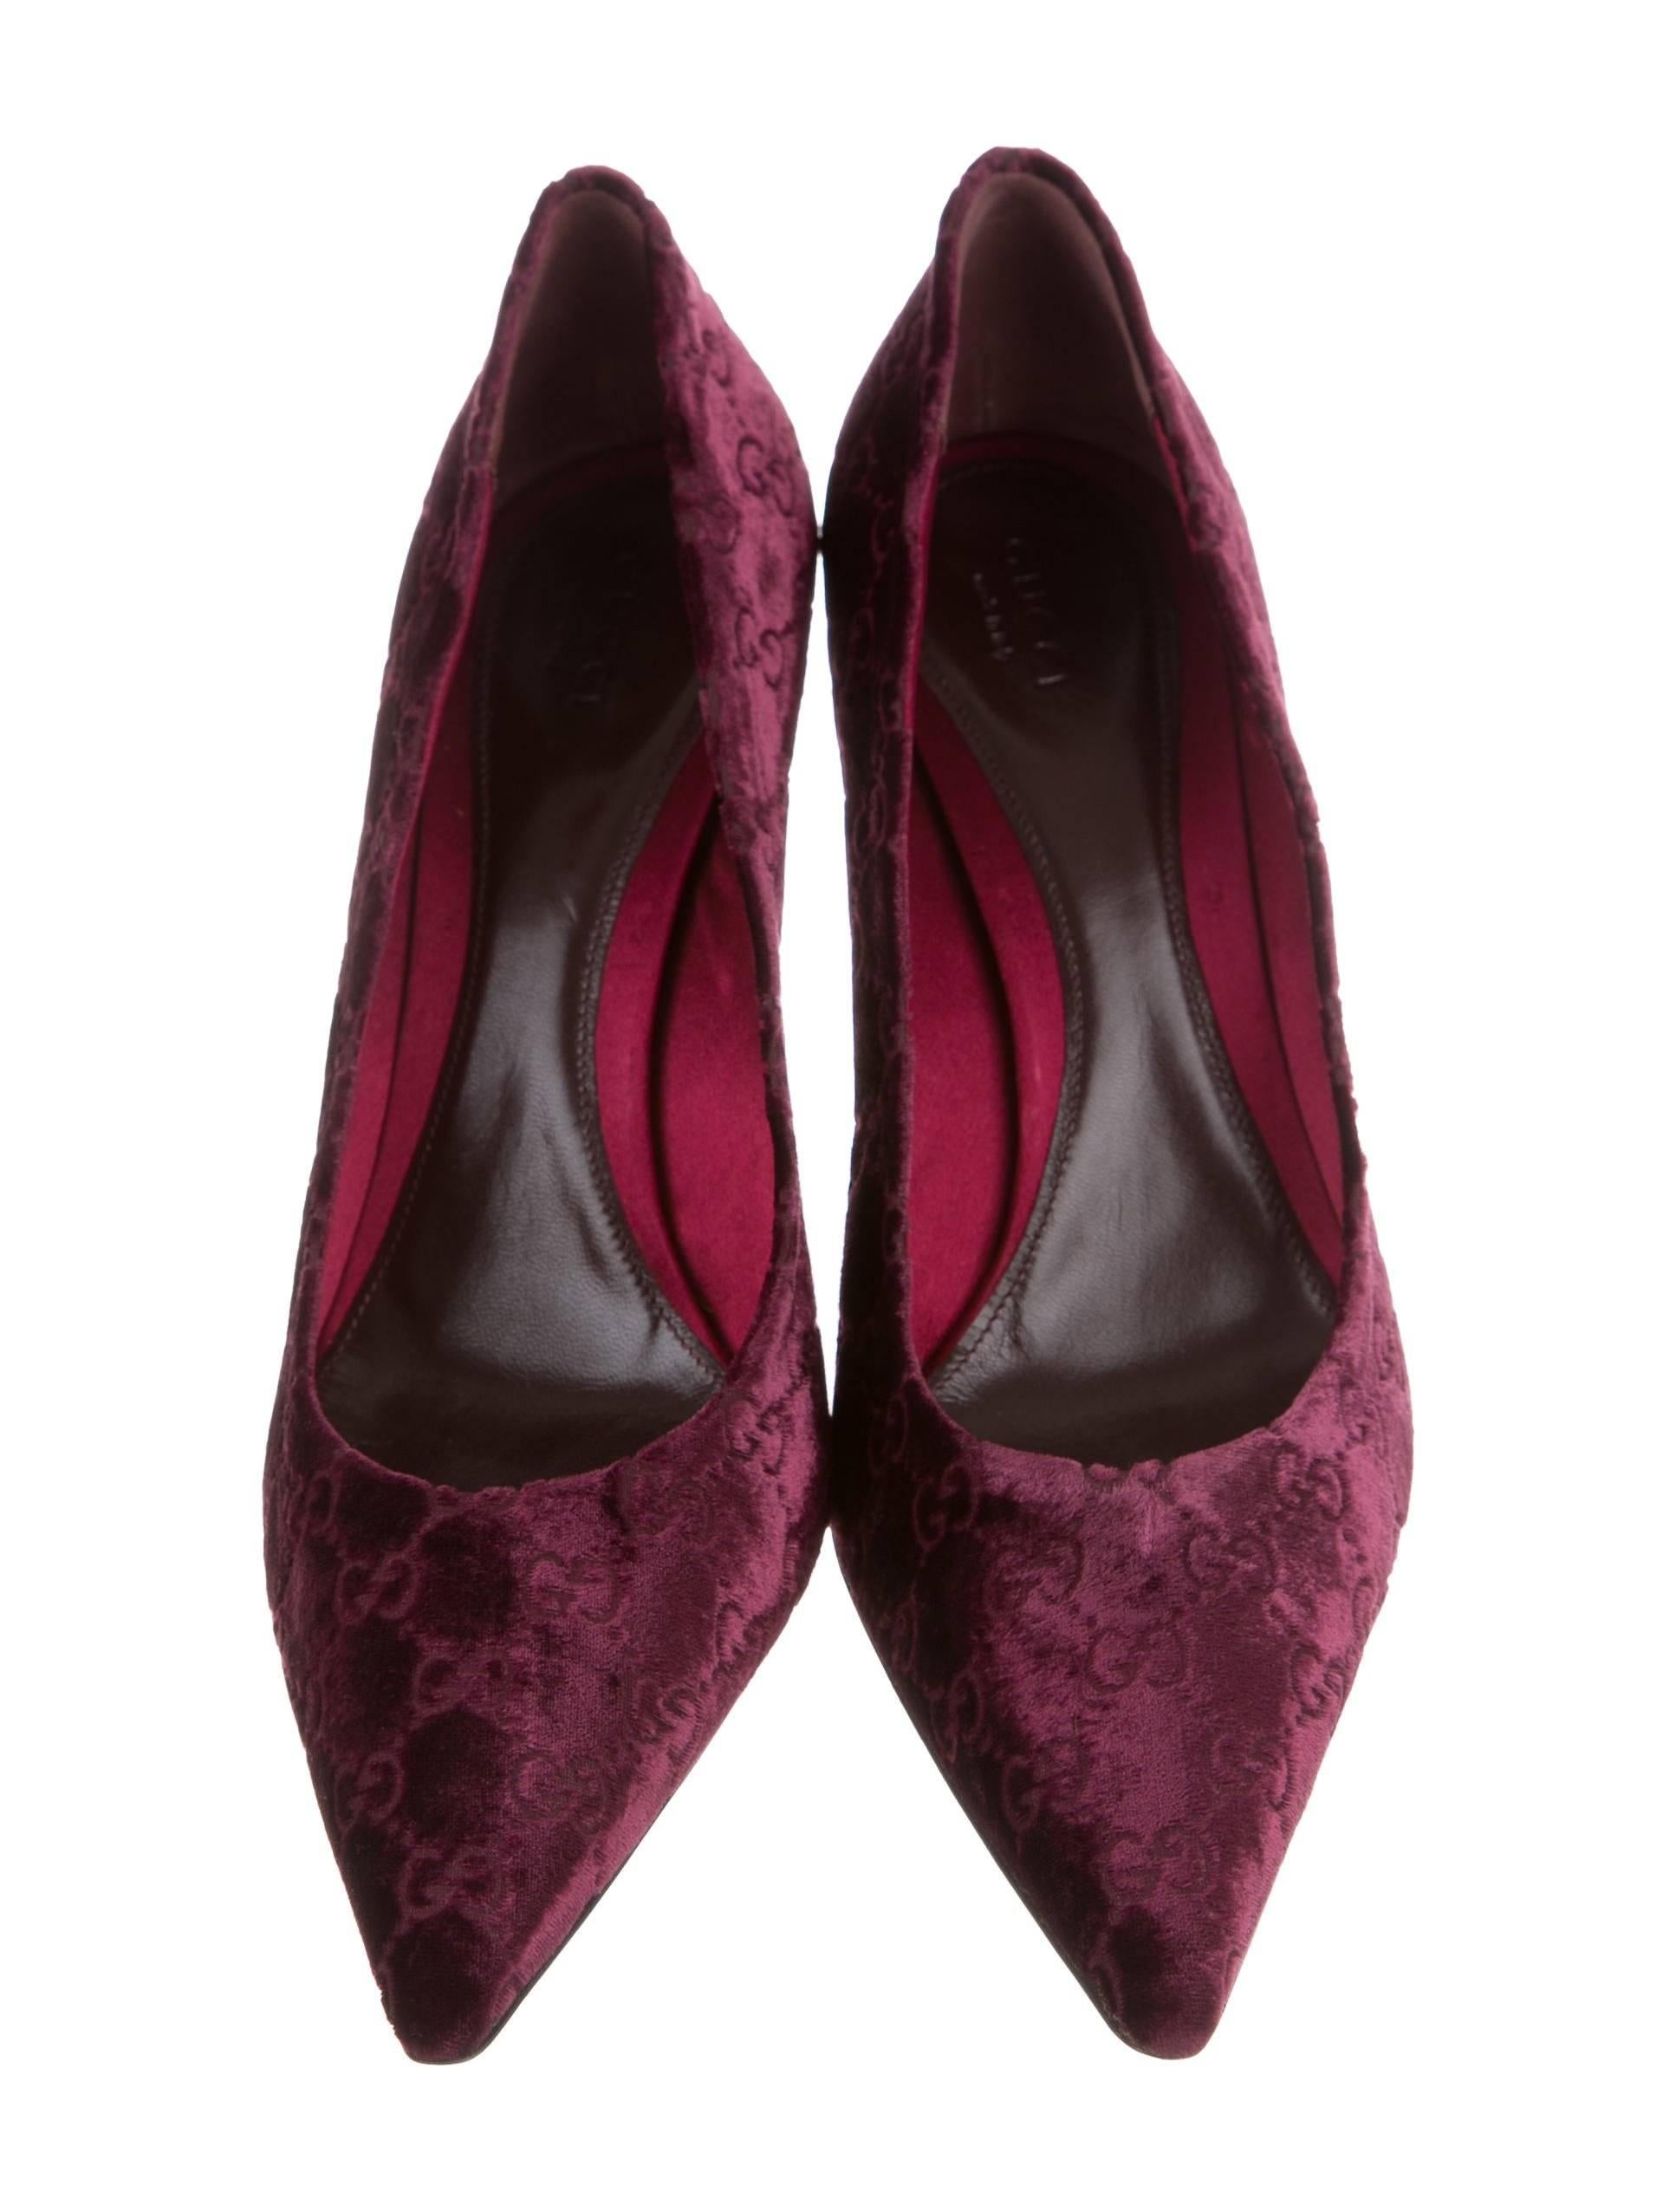 New Tom Ford for Gucci Velvet GG Pumps
Highly Collectible Pair from Tom Ford Era
Designer size - 11B
Color - Black Cherry
Velvet with GG Imprint
Snakeskin Covered Heel - 3.5 inches
Gold-tone Bamboo Detail
Leather Sole and Insole
Made in Italy
New